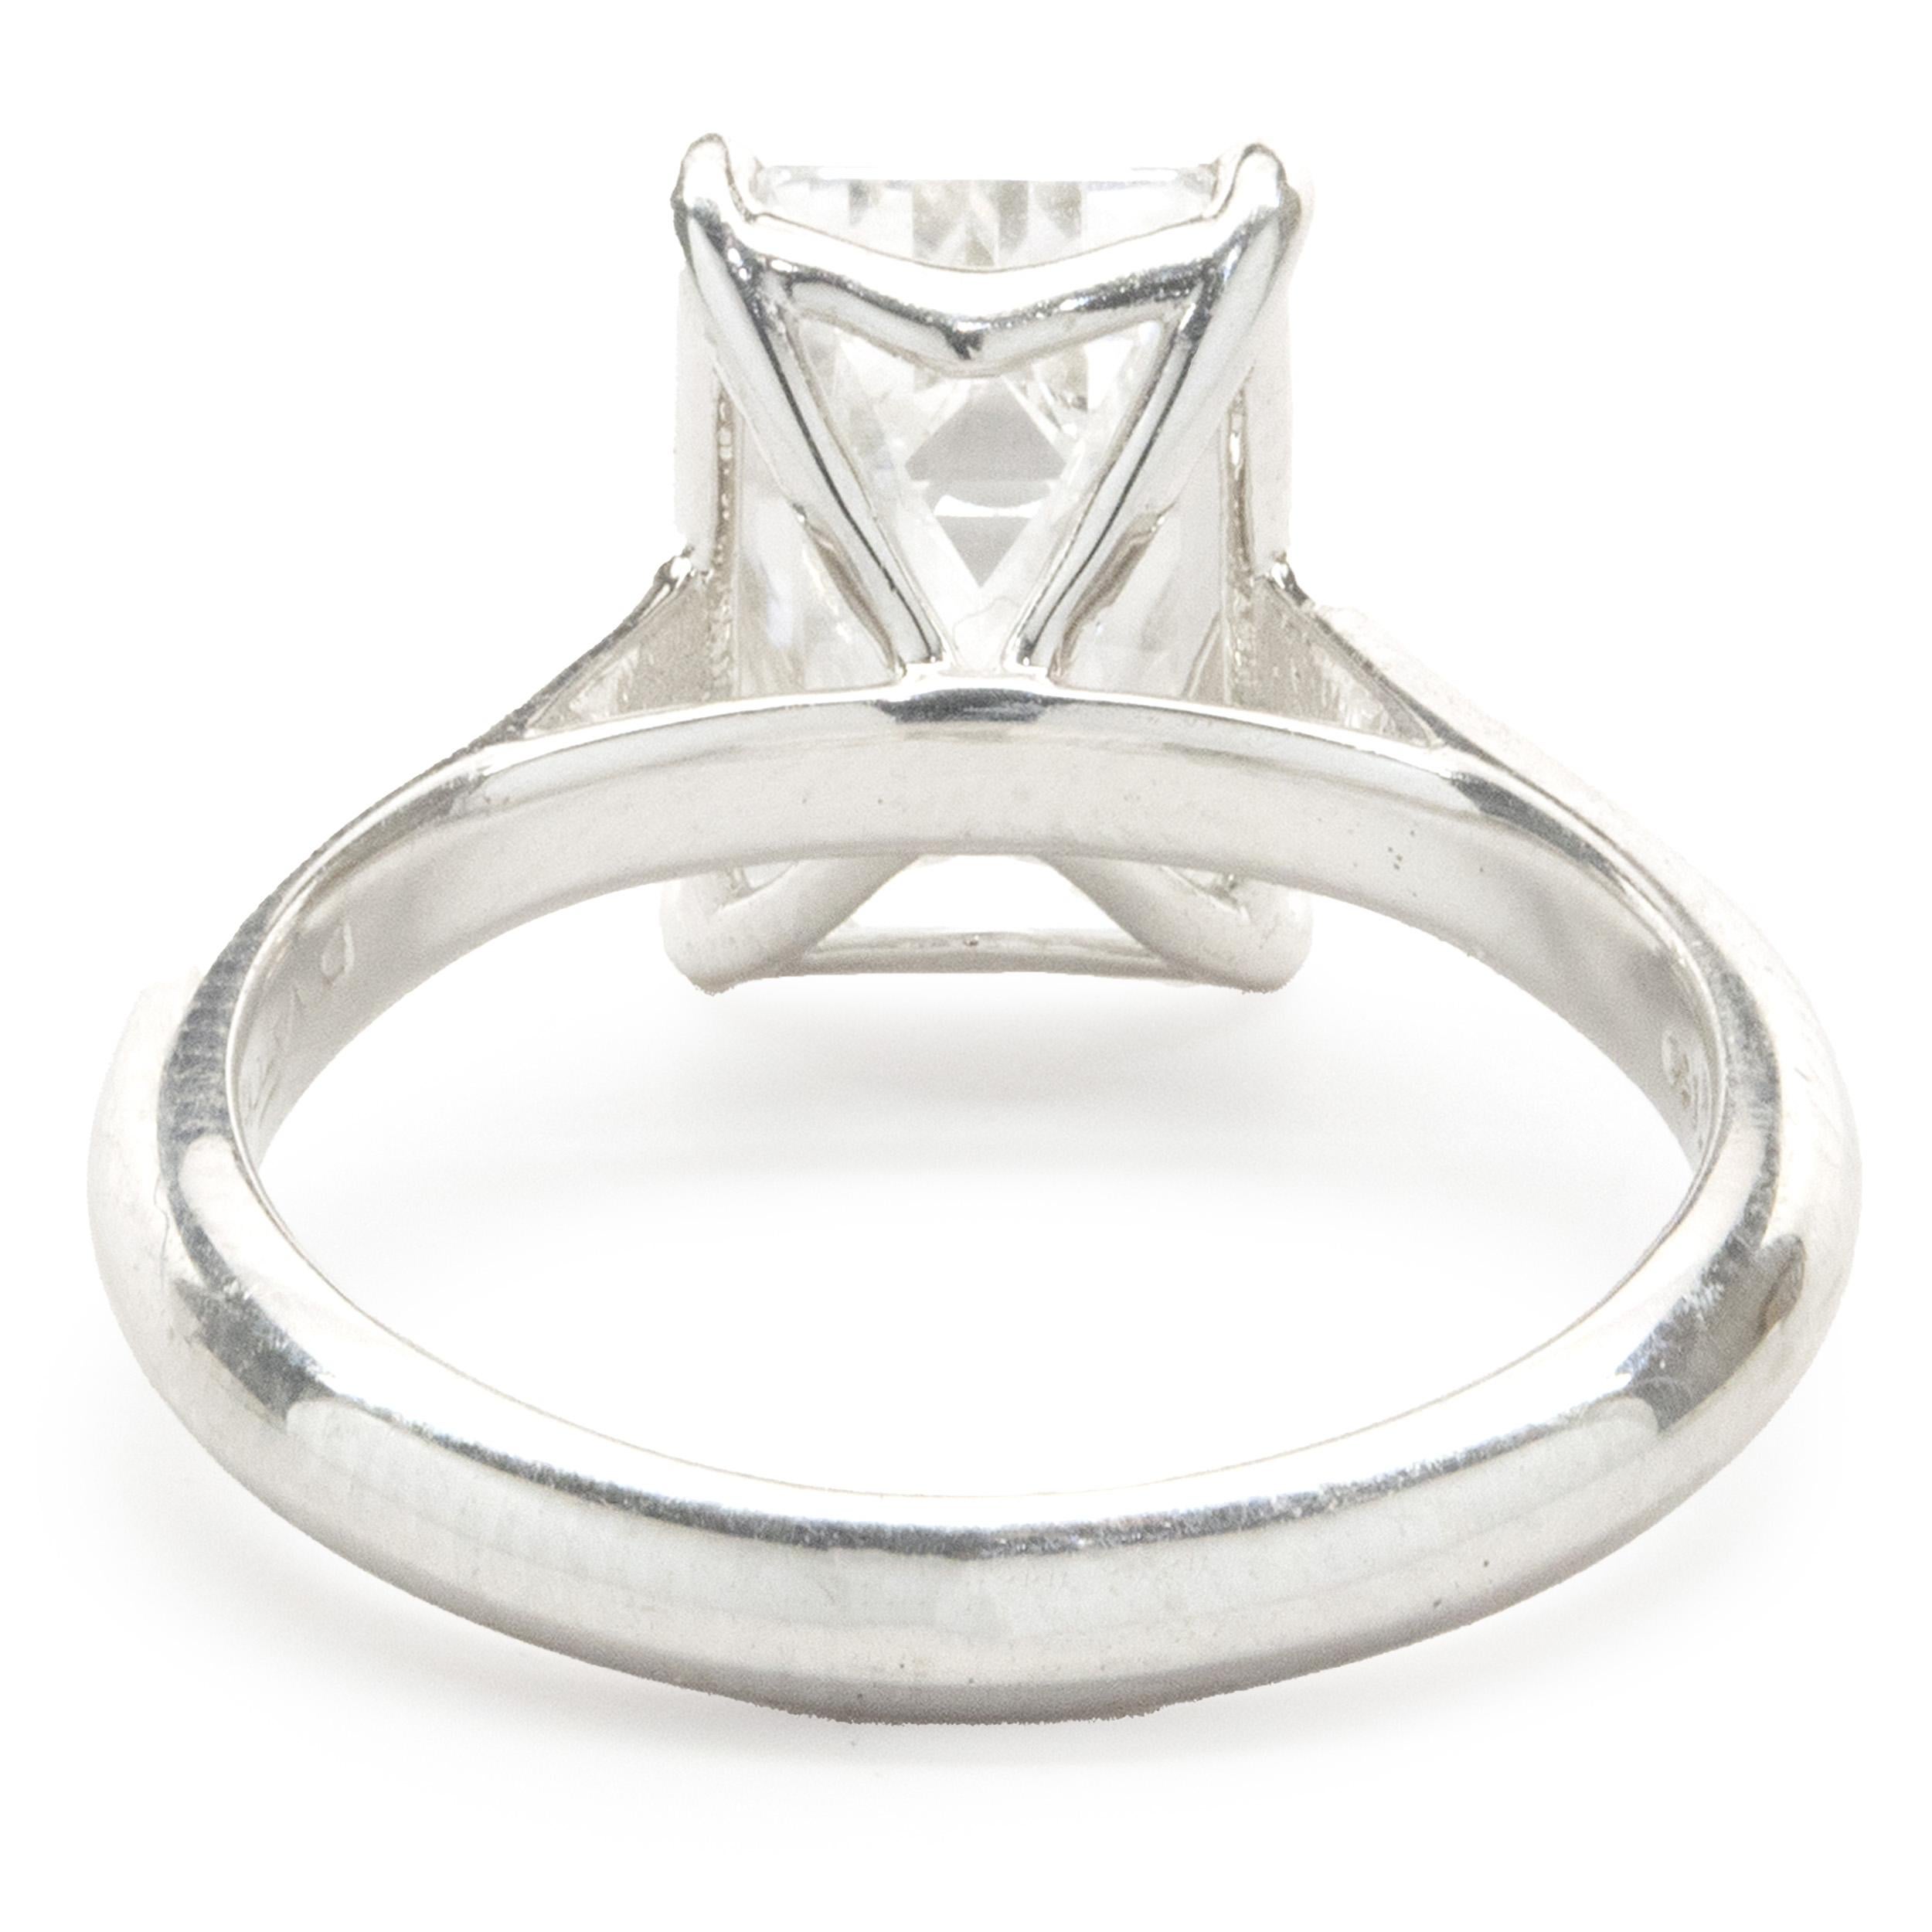 Platinum Emerald Cut Diamond Engagement Ring In Excellent Condition For Sale In Scottsdale, AZ